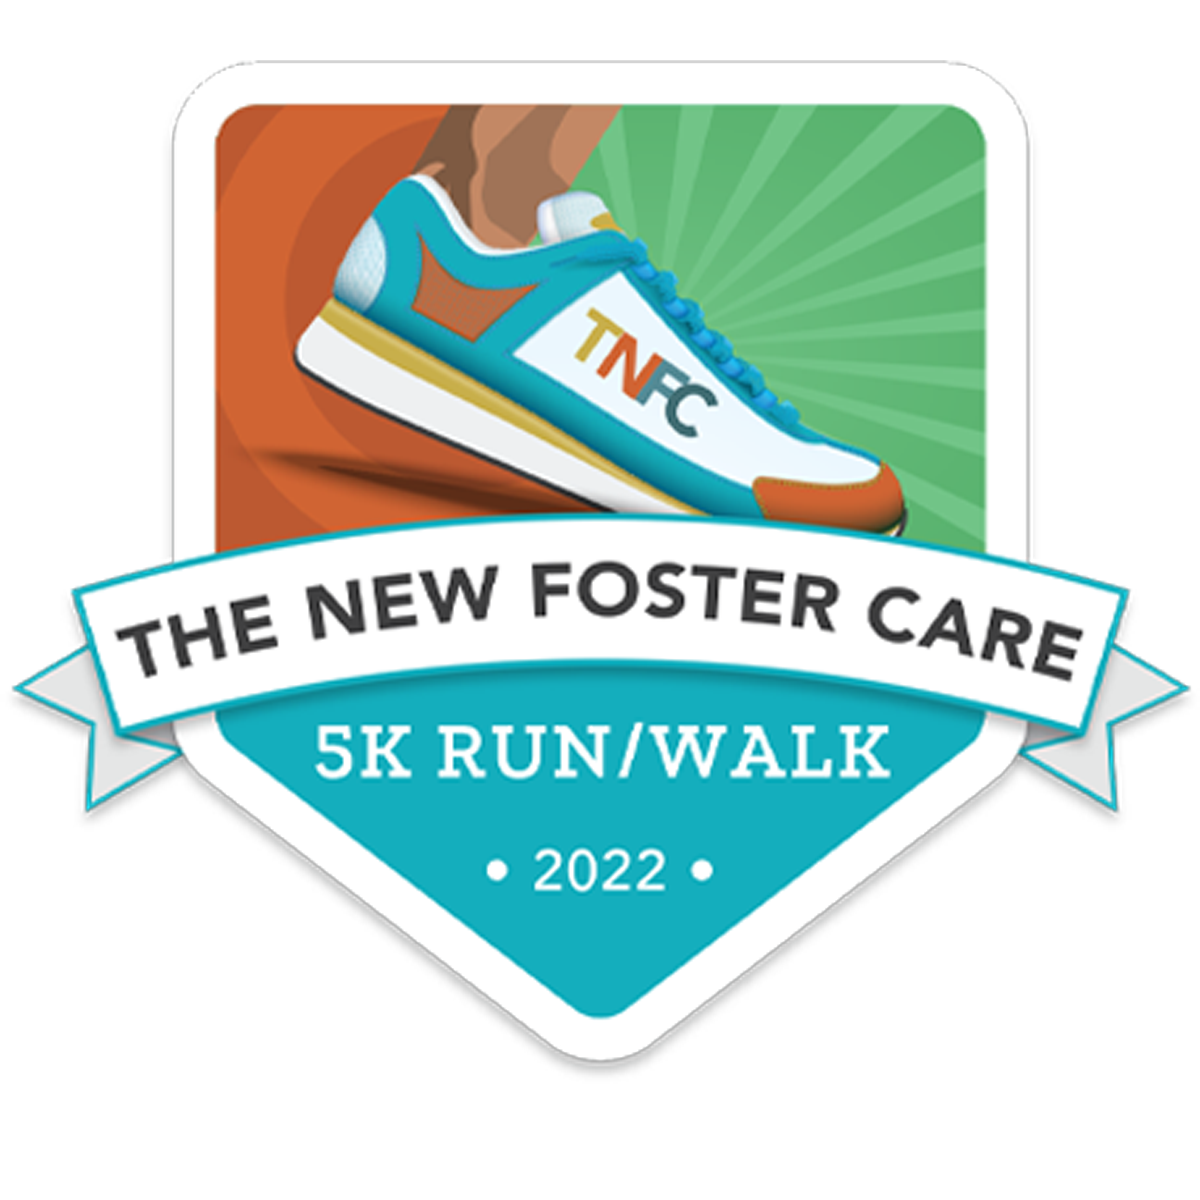 The New Foster Care 5k Walk and Run